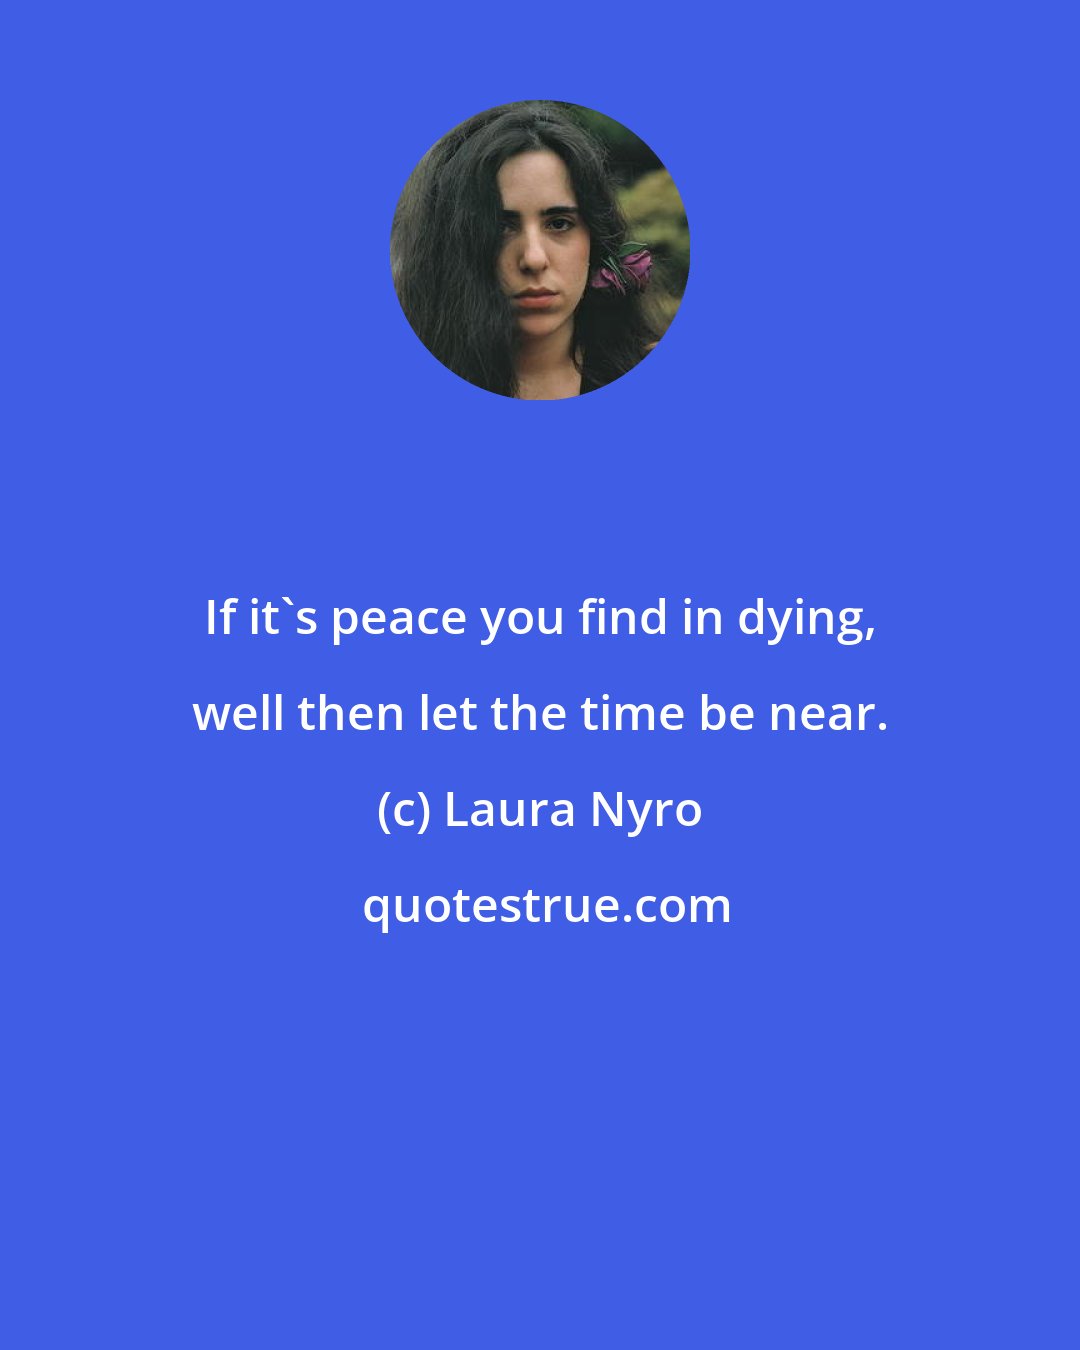 Laura Nyro: If it's peace you find in dying, well then let the time be near.